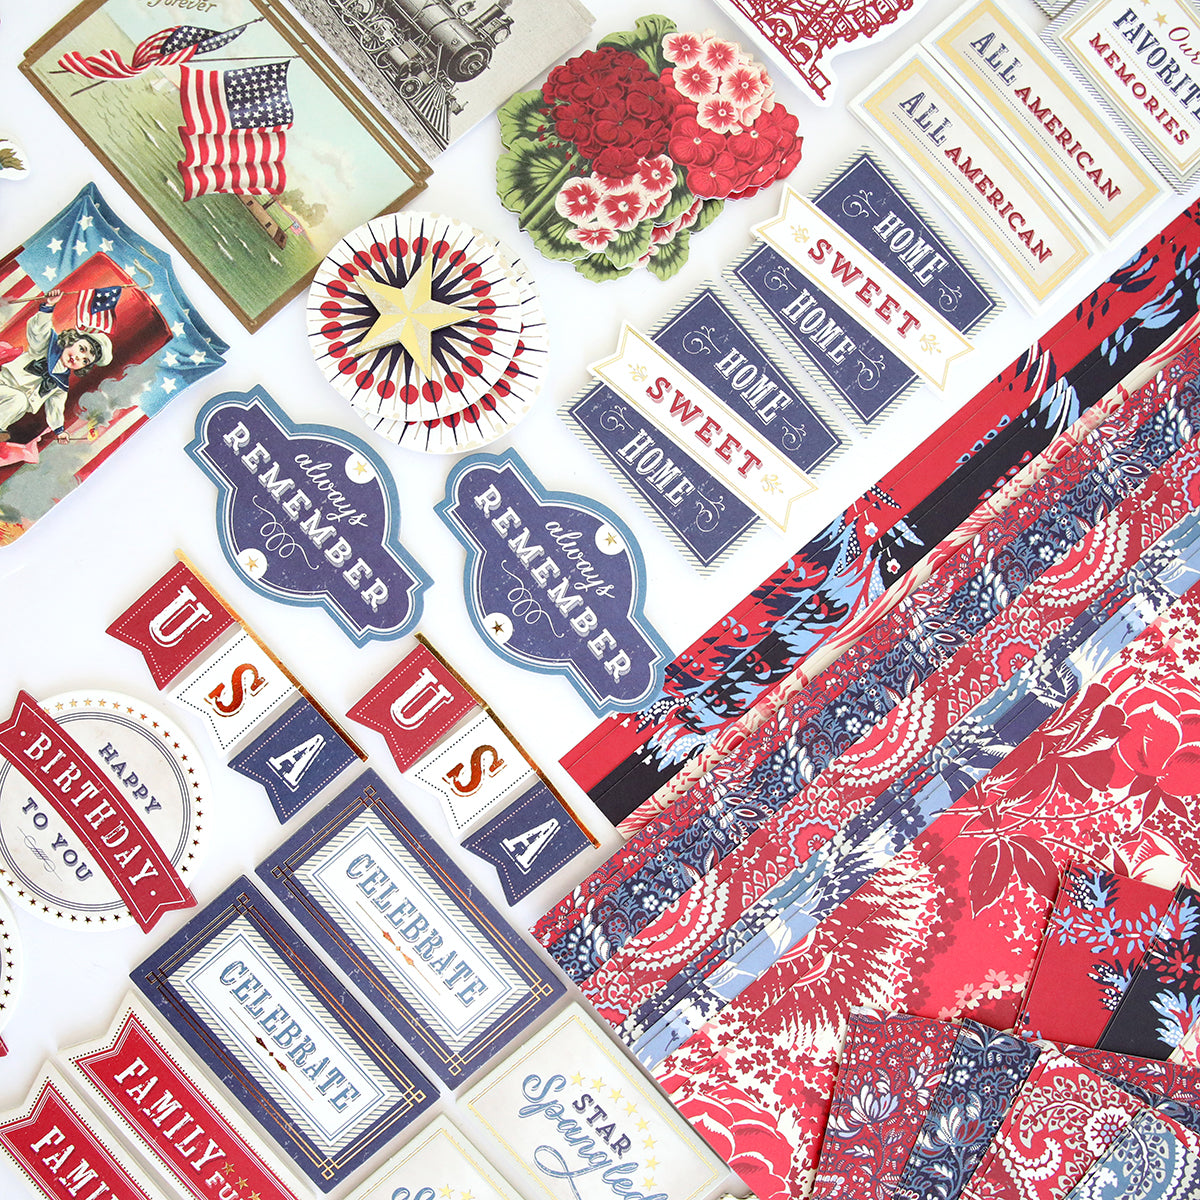 The Madison Paper Crafting Collection is a collection of patriotic embellishments on a white surface.